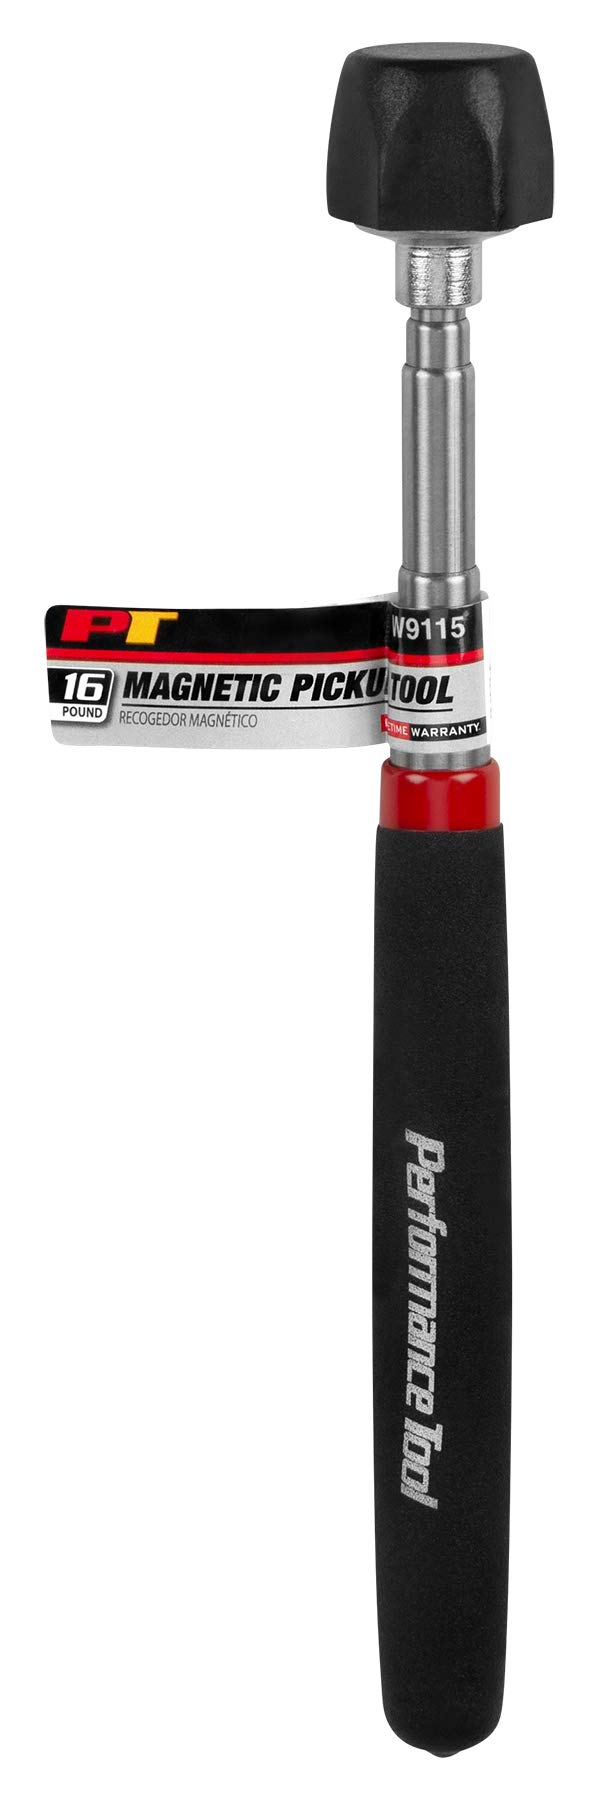 Performance Tool 16-lb Magnetic Pick-Up Tool $5 + Free S&H w/ Prime or $35+